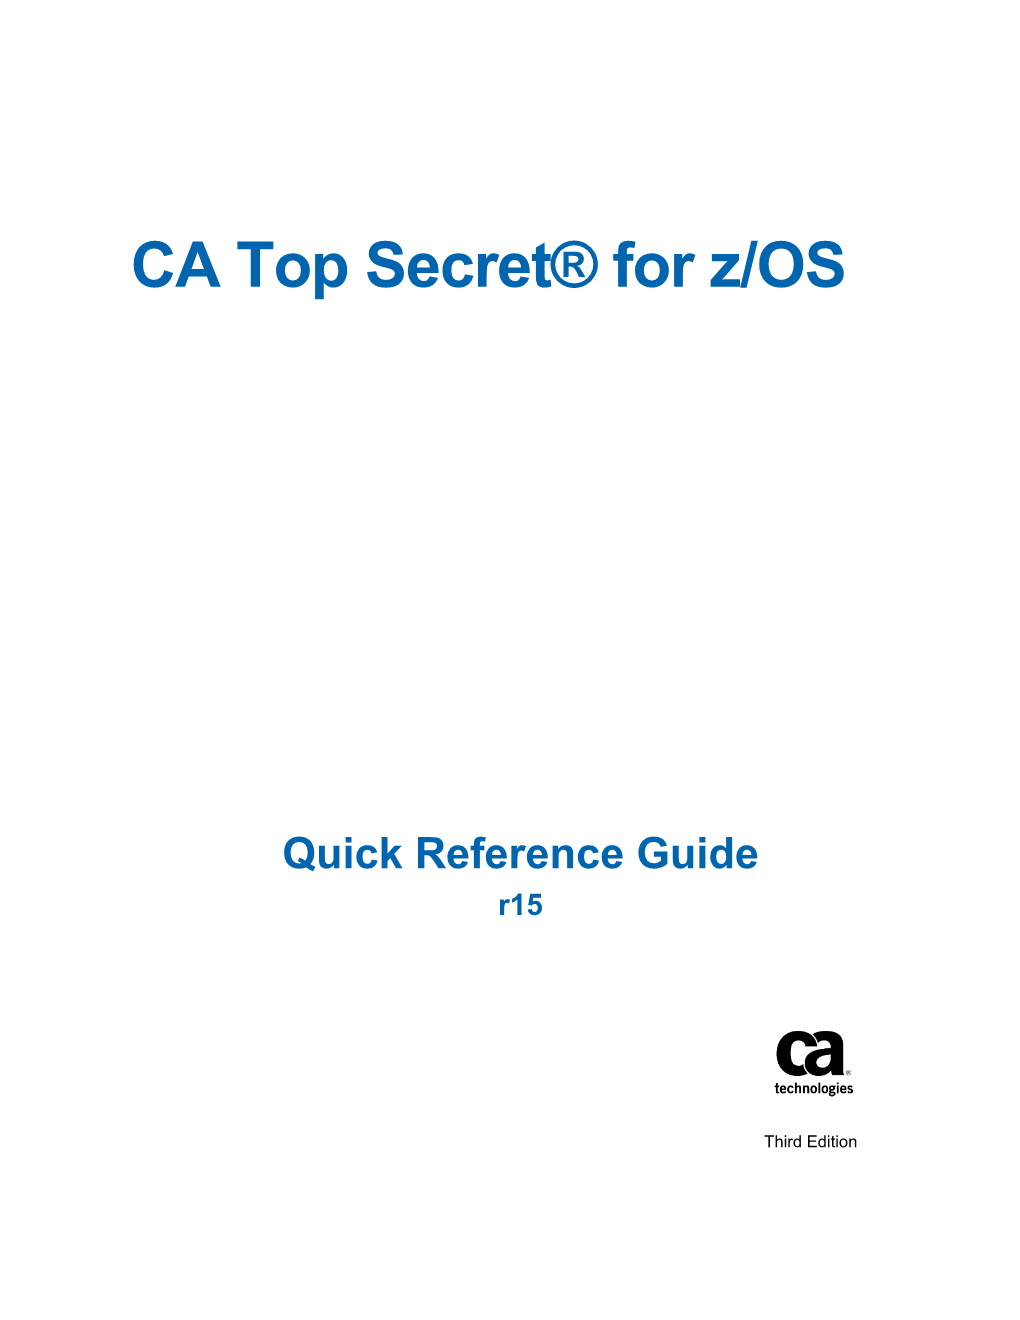 CA Top Secret for Z/OS Quick Reference Guide